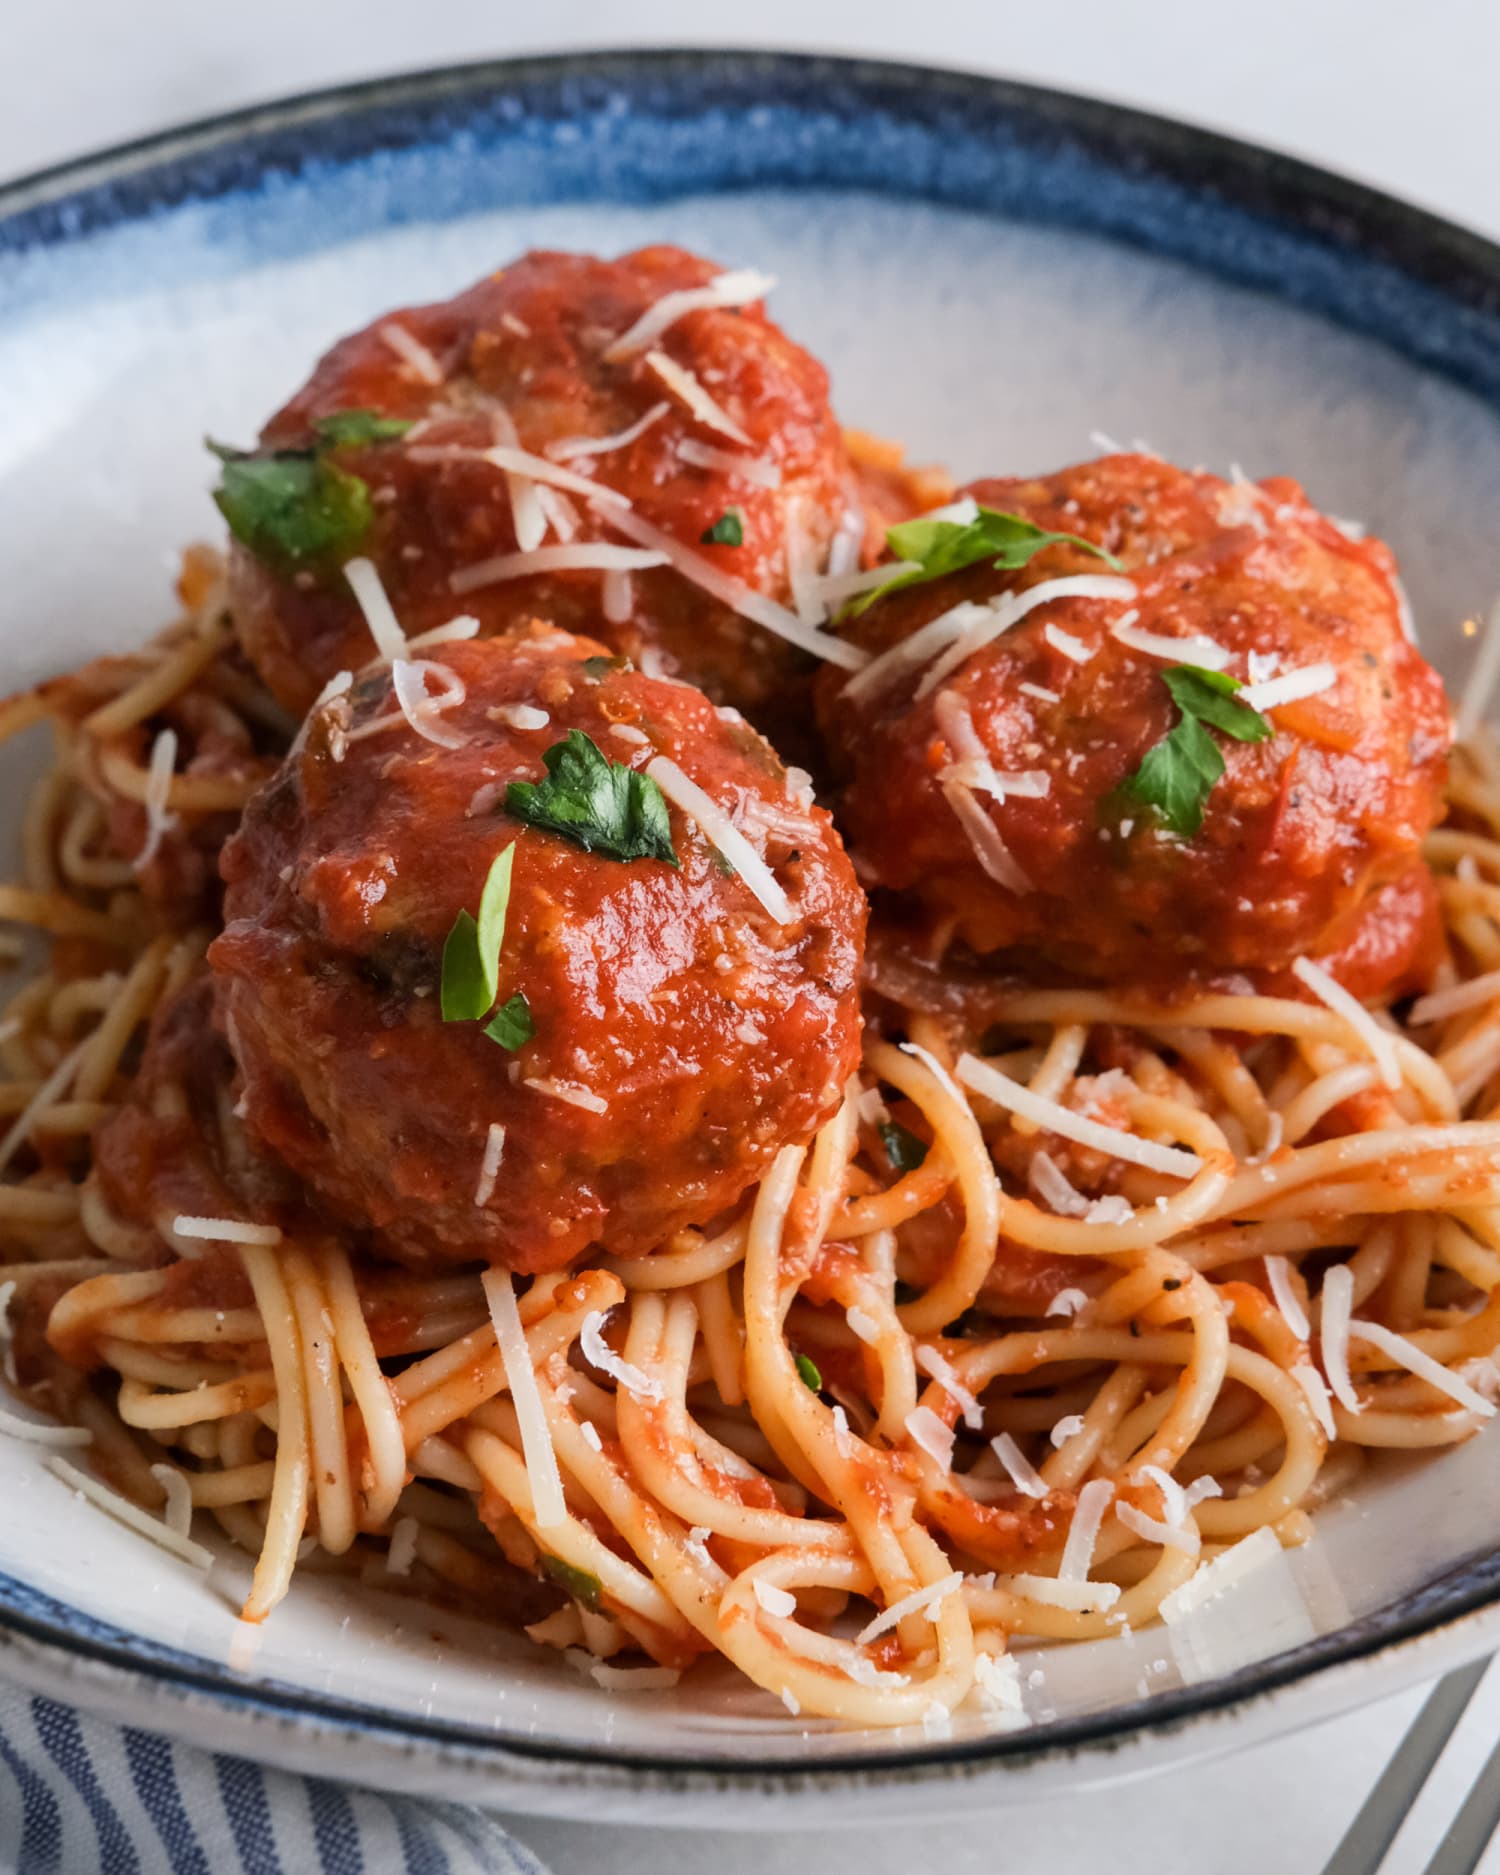 I Tried Taylor Swift’s Favorite Spaghetti & Meatballs Recipe and I Get Why She’ll Make It “For Life”